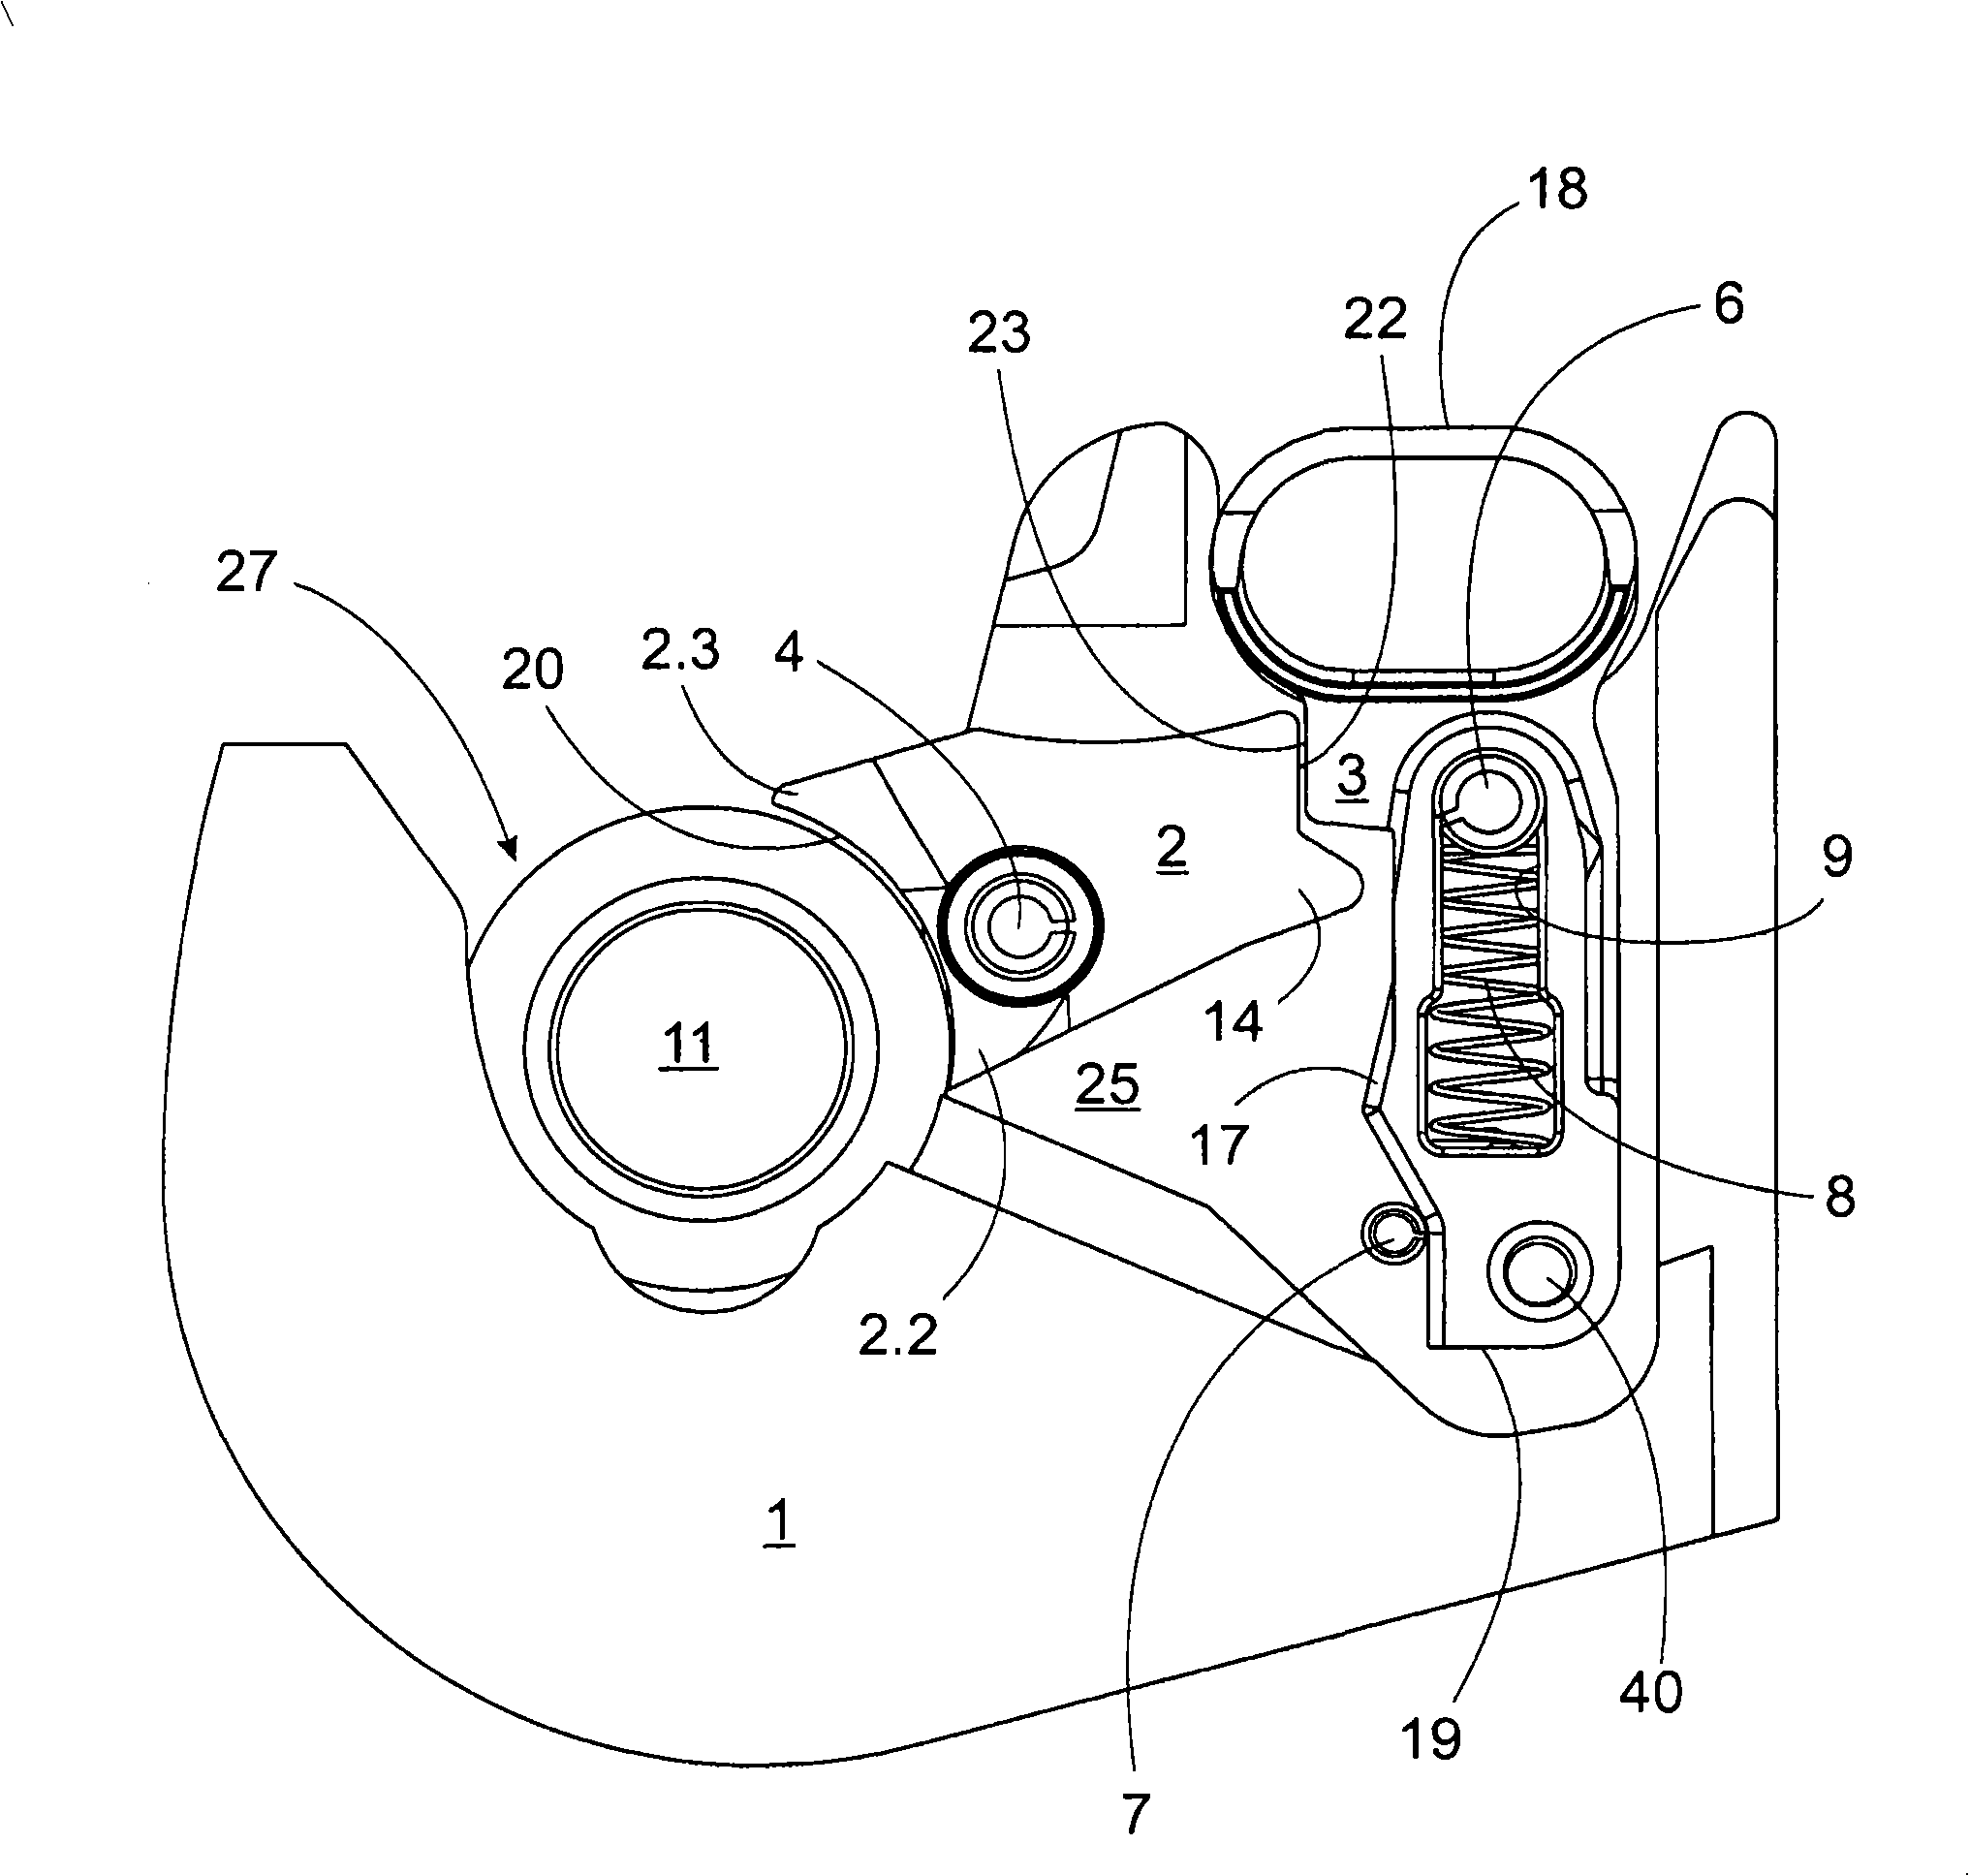 Coupling hook particularly for the lower arms of a three-point linkage of a tractor